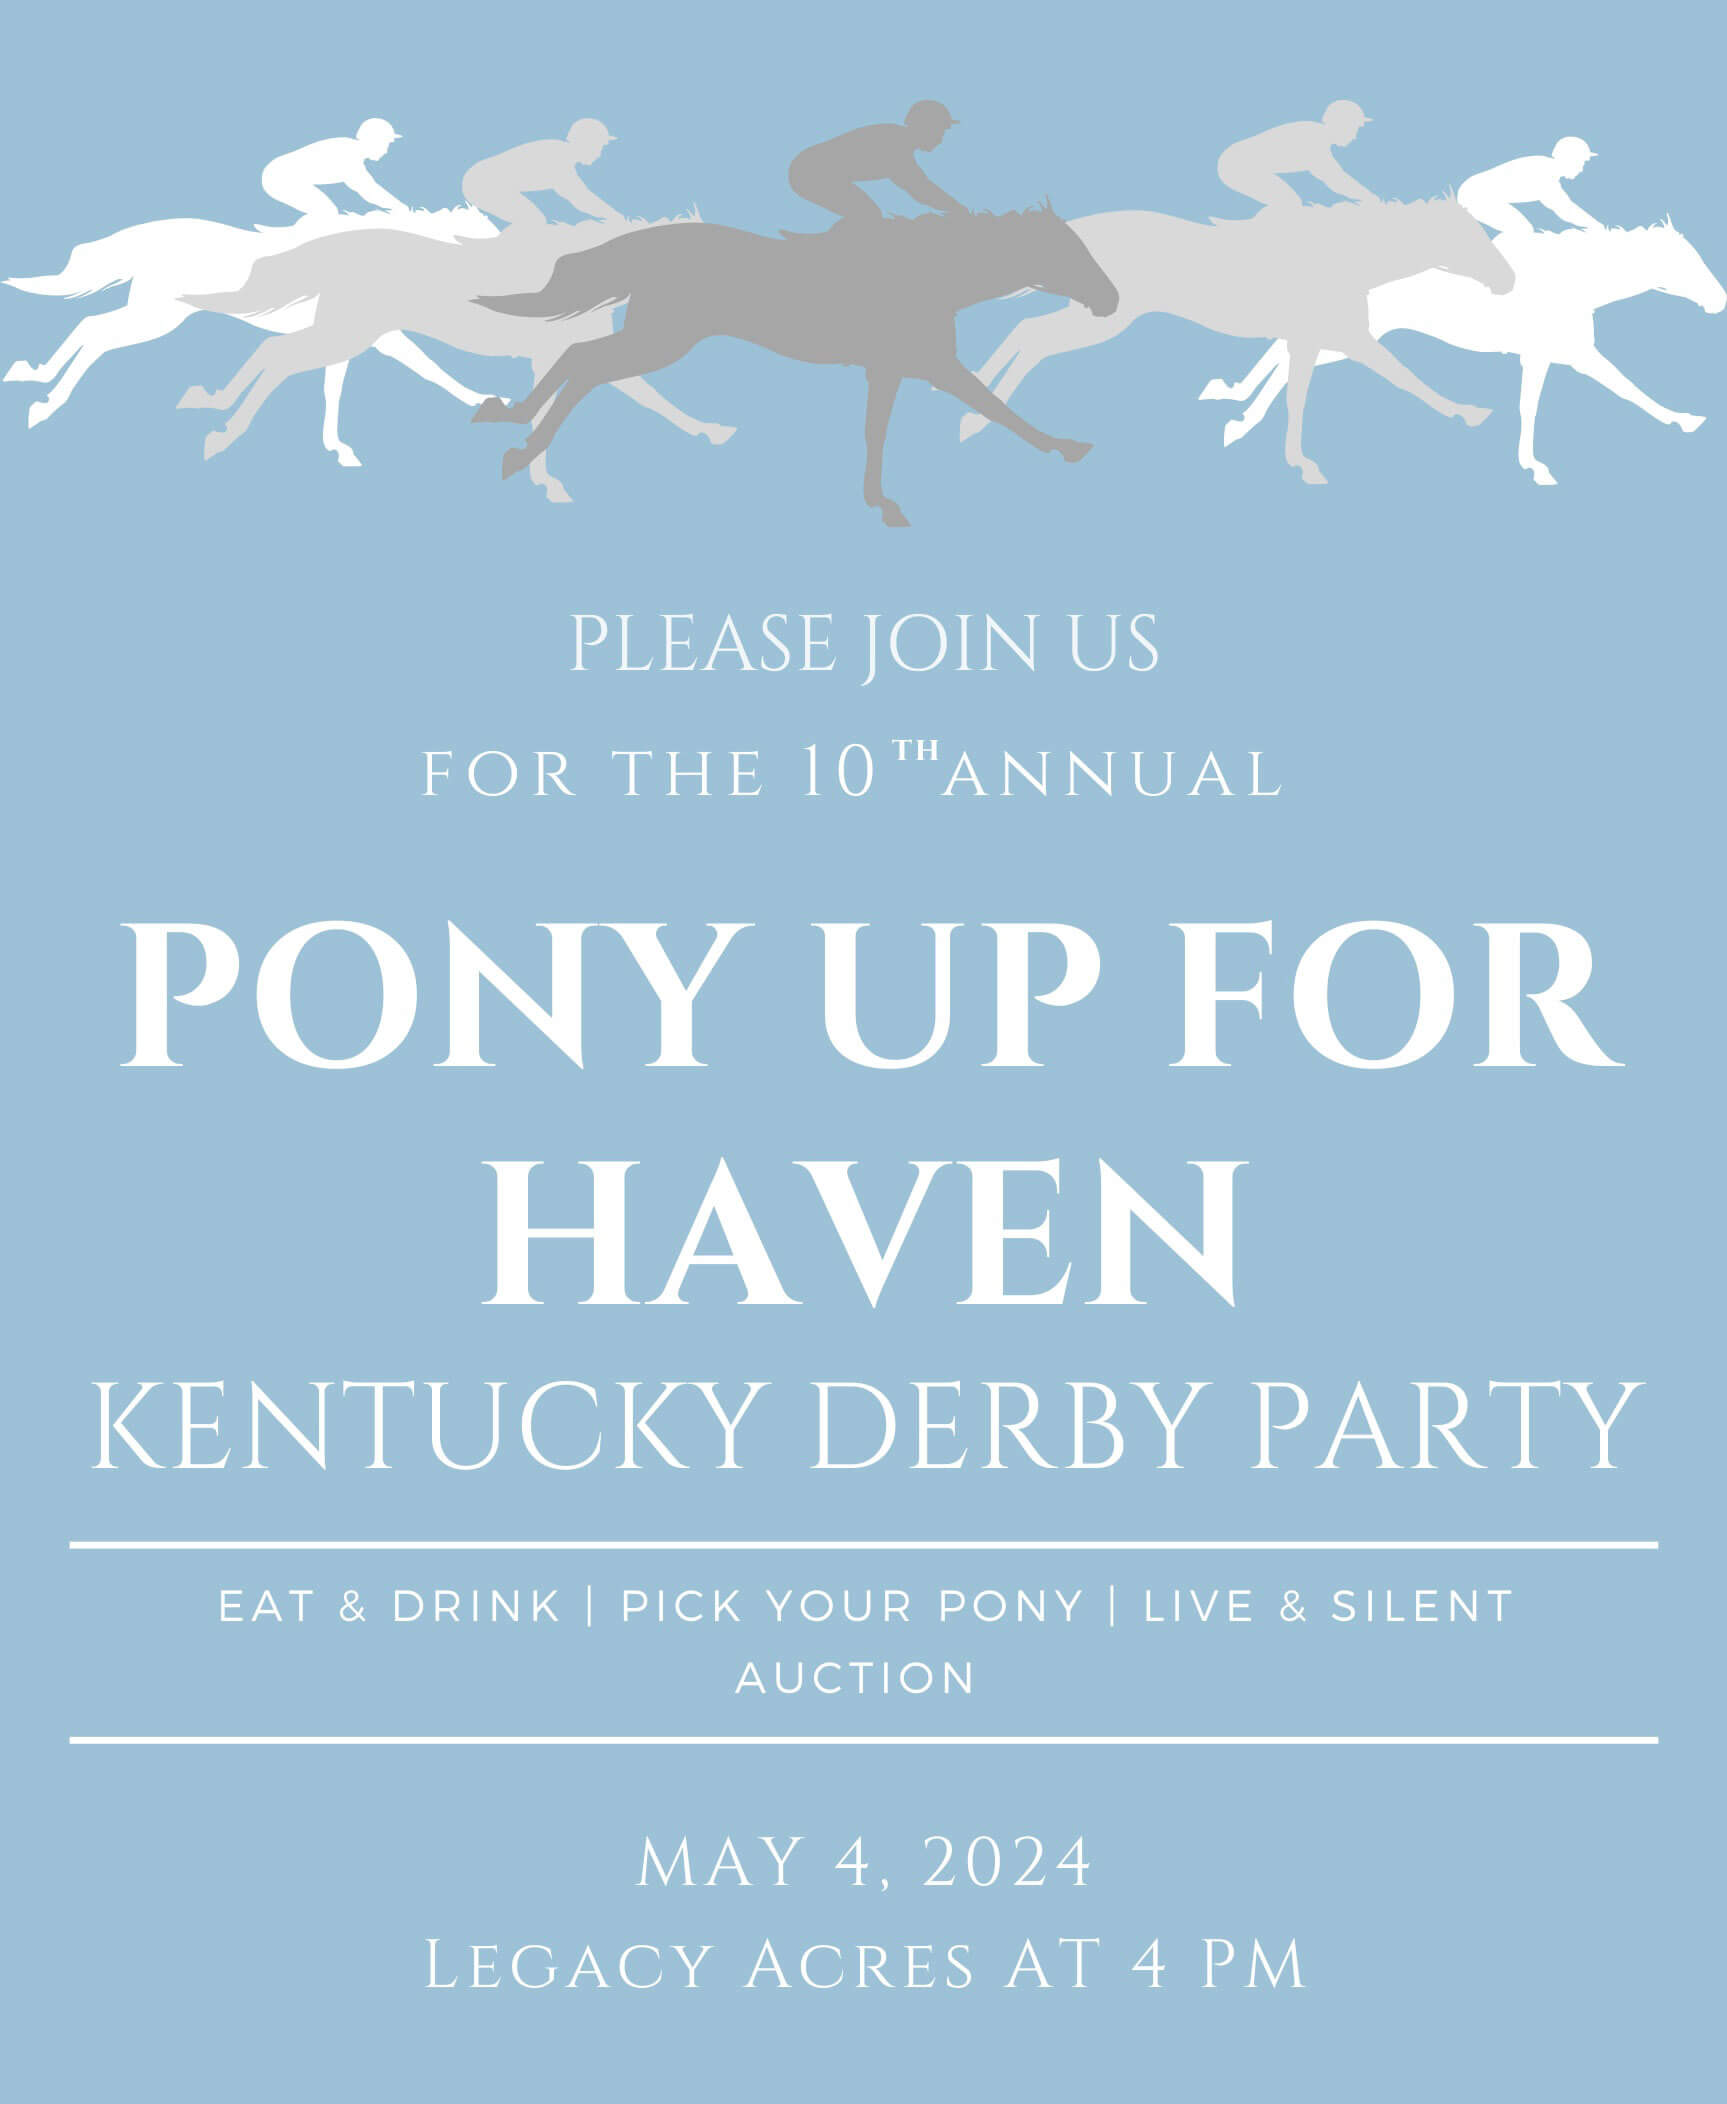 Please Join us for the 10th Annual Pony Up For Haven Kentucky Derby Party - May 4th at Legacy Acres 4:00 PM